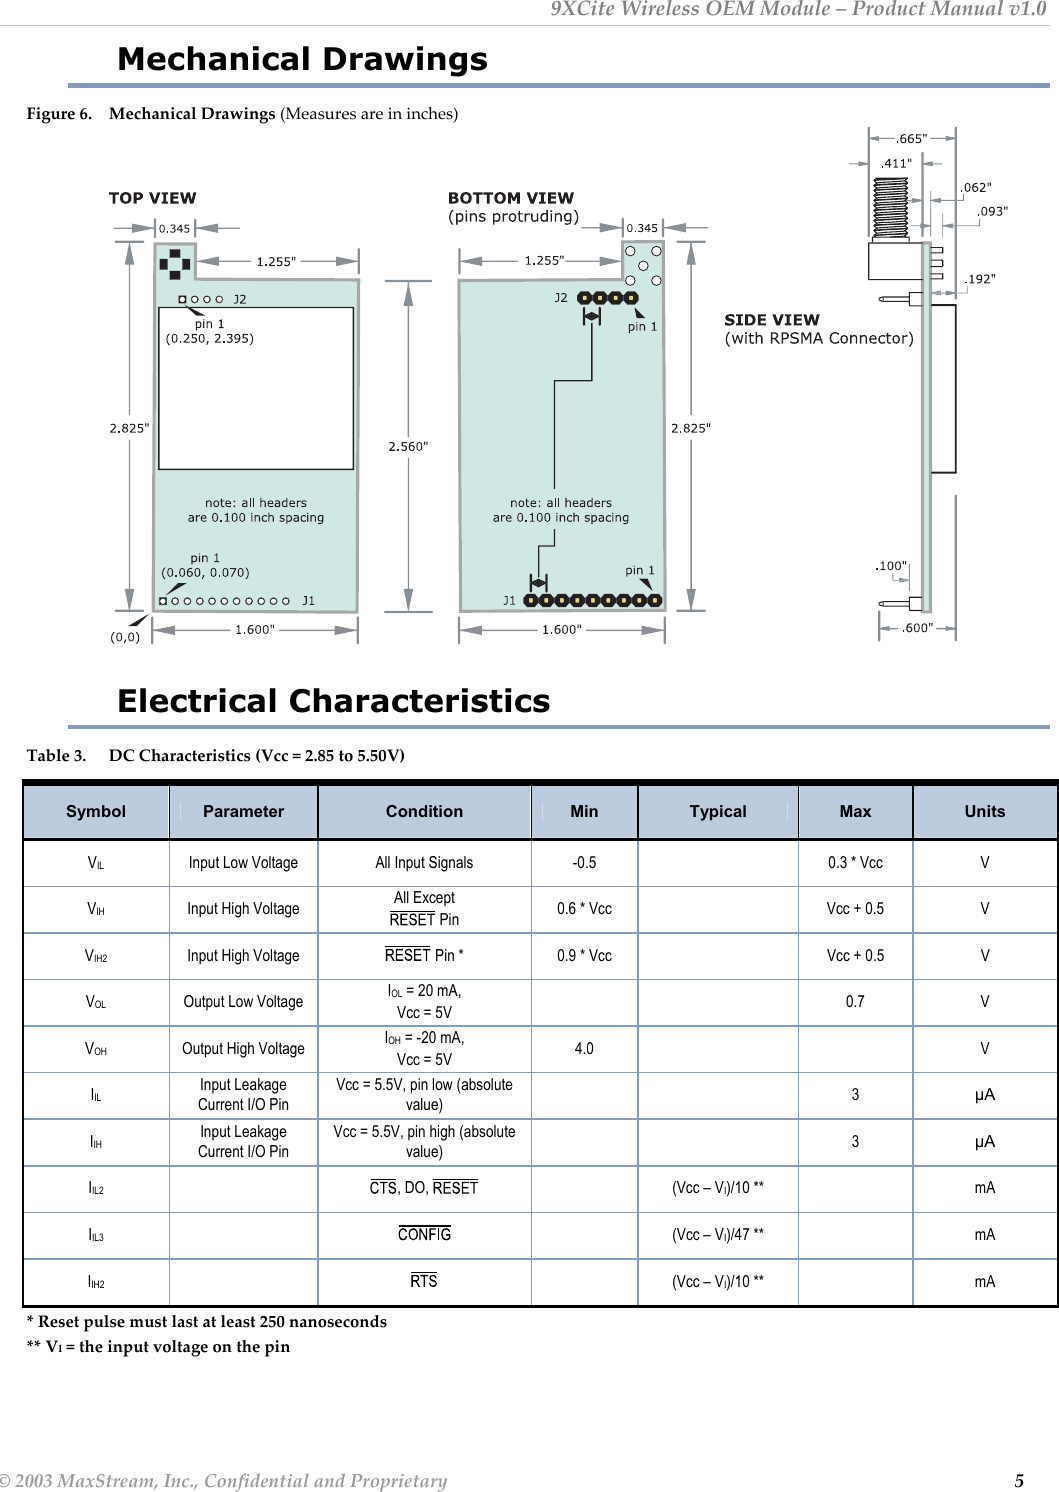 9XCite Wireless OEM Module – Product Manual v1.0 Mechanical Drawings Figure 6.    Mechanical Drawings (Measures are in inches)                  Electrical Characteristics Table 3.    DC Characteristics (Vcc = 2.85 to 5.50V)  Symbol  Parameter  Condition  Min  Typical  Max  Units VIL  Input Low Voltage  All Input Signals  -0.5    0.3 * Vcc  V VIH  Input High Voltage  All Except  Pin  0.6 * Vcc    Vcc + 0.5  V VIH2  Input High Voltage   Pin *  0.9 * Vcc    Vcc + 0.5  V VOL  Output Low Voltage  IOL = 20 mA,  Vcc = 5V    0.7 V VOH  Output High Voltage  IOH = -20 mA,  Vcc = 5V  4.0    V IIL Input Leakage Current I/O Pin Vcc = 5.5V, pin low (absolute value)    3 µA IIH Input Leakage Current I/O Pin Vcc = 5.5V, pin high (absolute value)    3 µA IIL2   , DO,           (Vcc – VI)/10 **    mA IIL3       (Vcc – VI)/47 **    mA IIH2       (Vcc – VI)/10 **    mA * Reset pulse must last at least 250 nanoseconds ** VI = the input voltage on the pin © 2003 MaxStream, Inc., Confidential and Proprietary                                                                                                                         5 